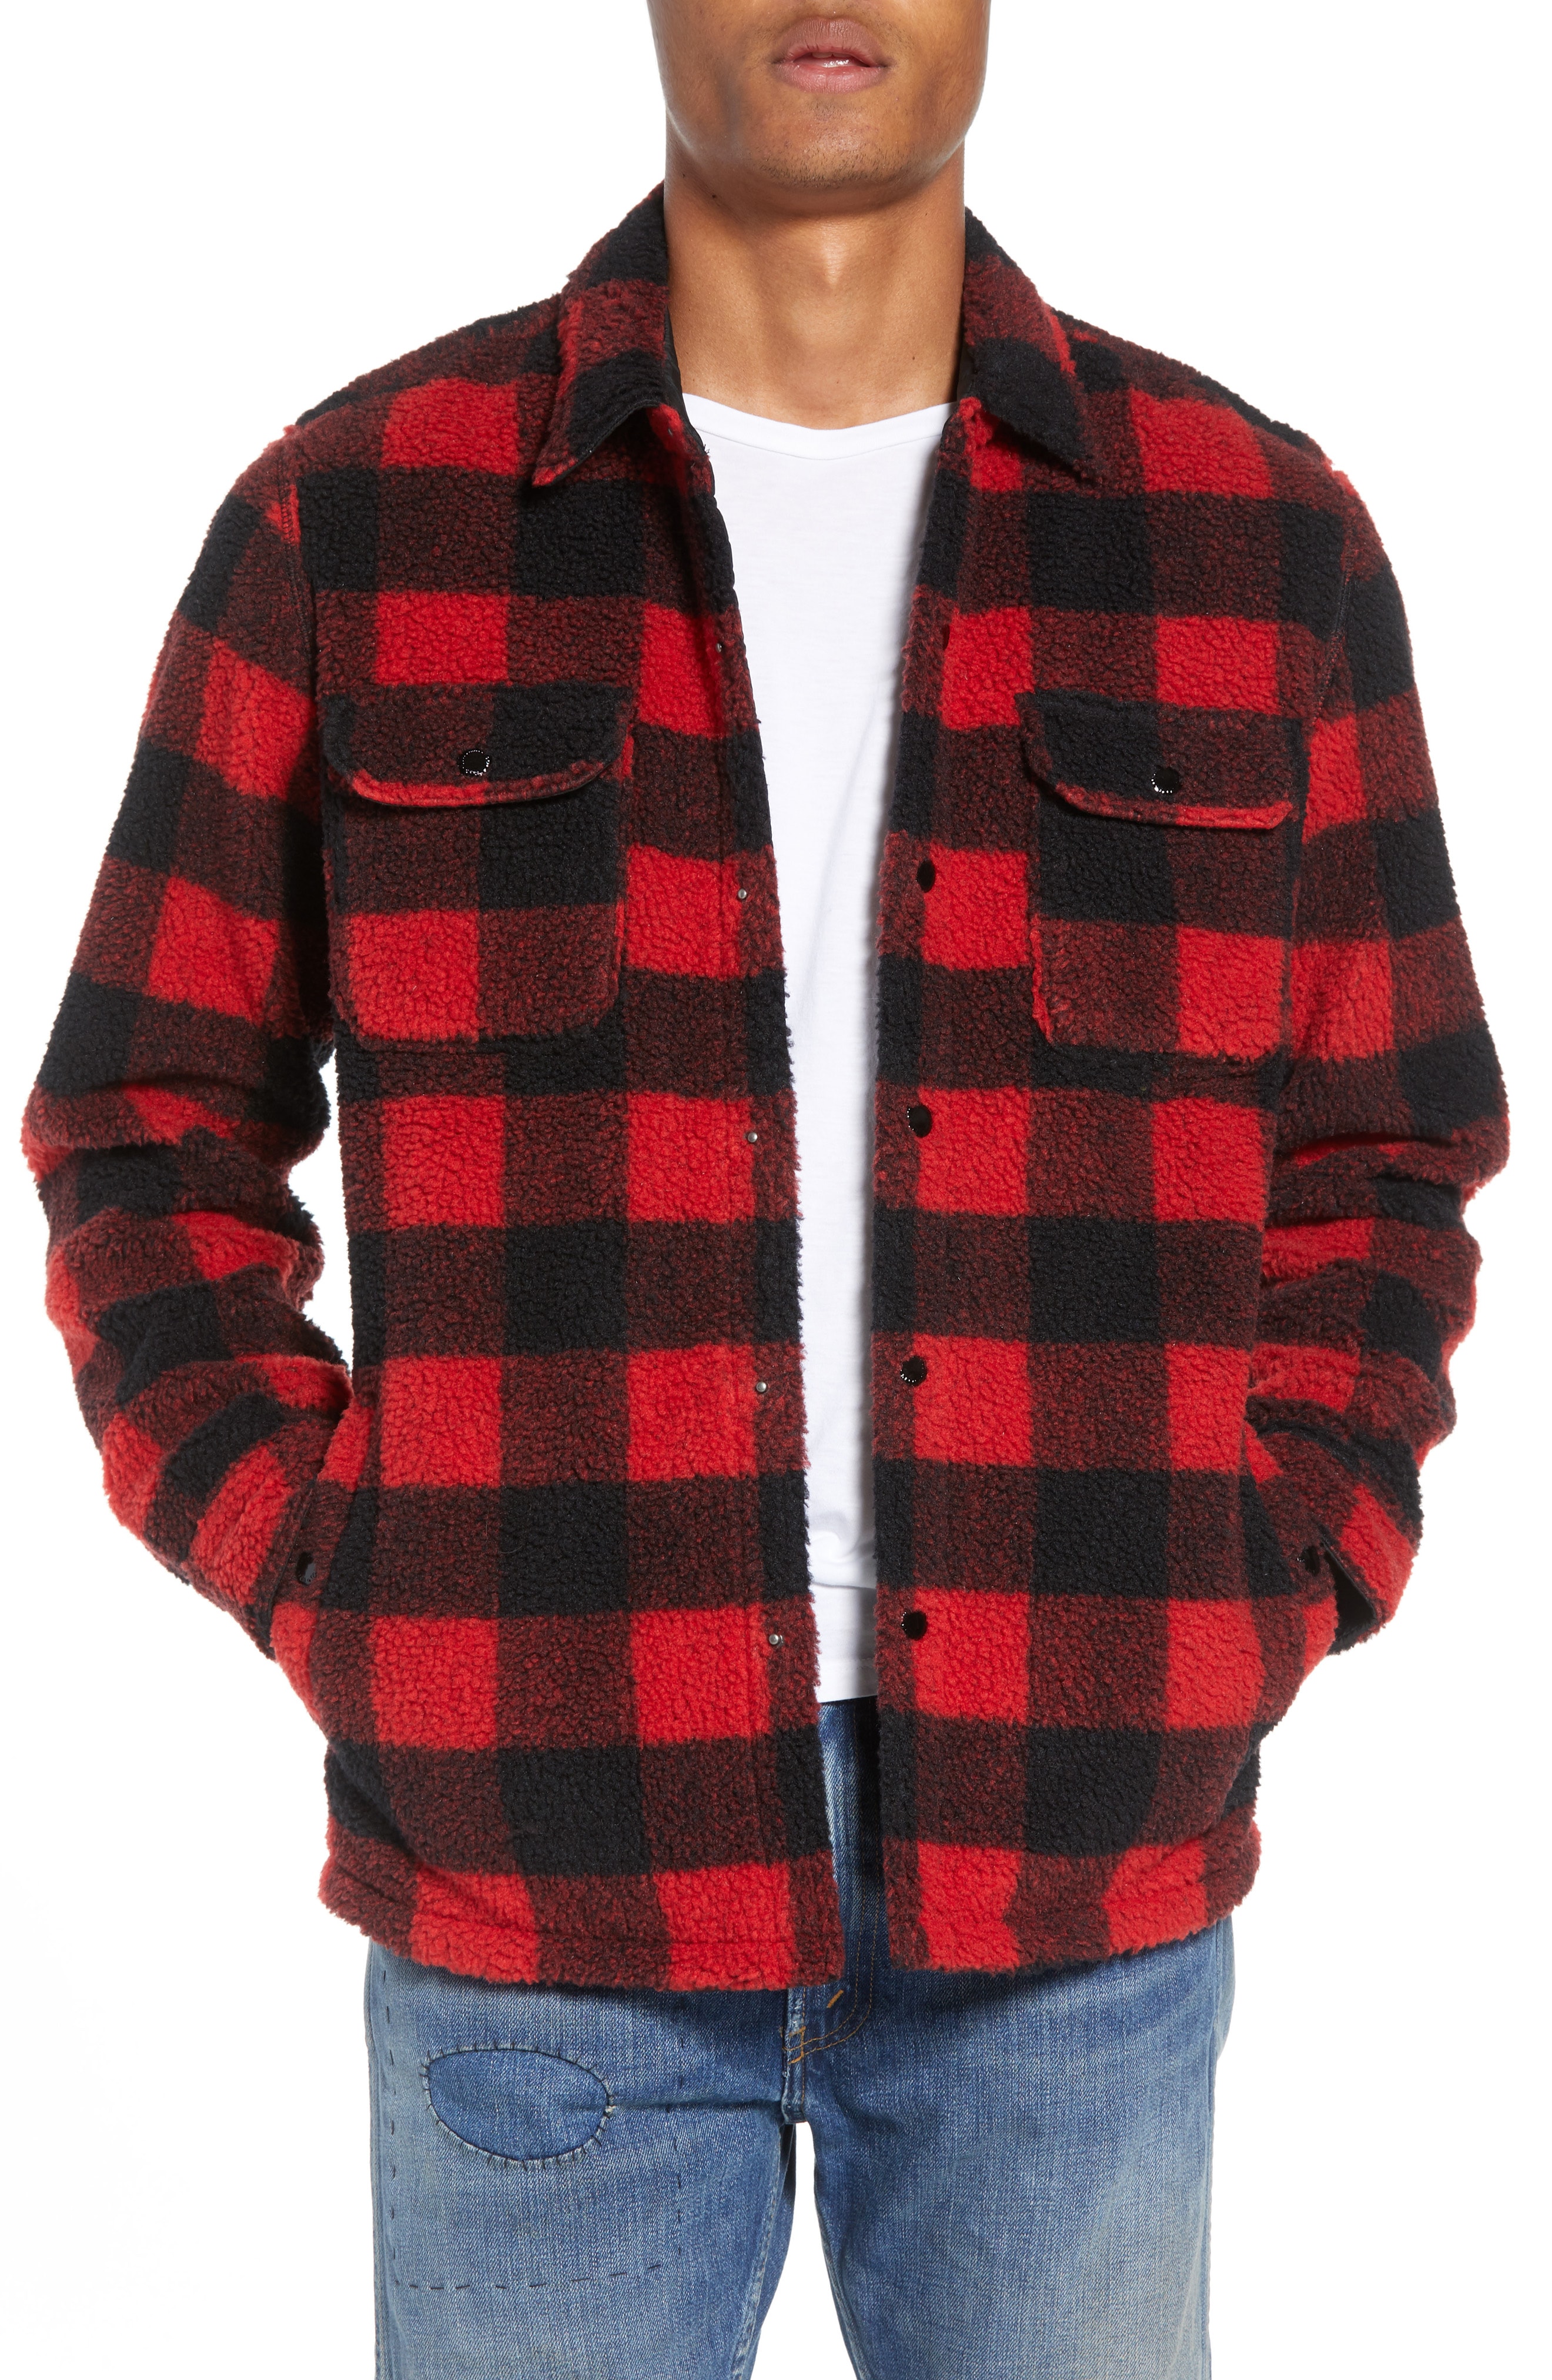 Men’s Levi’s Plaid Faux Shearling Shirt, Size Large – Red | The Fashionisto